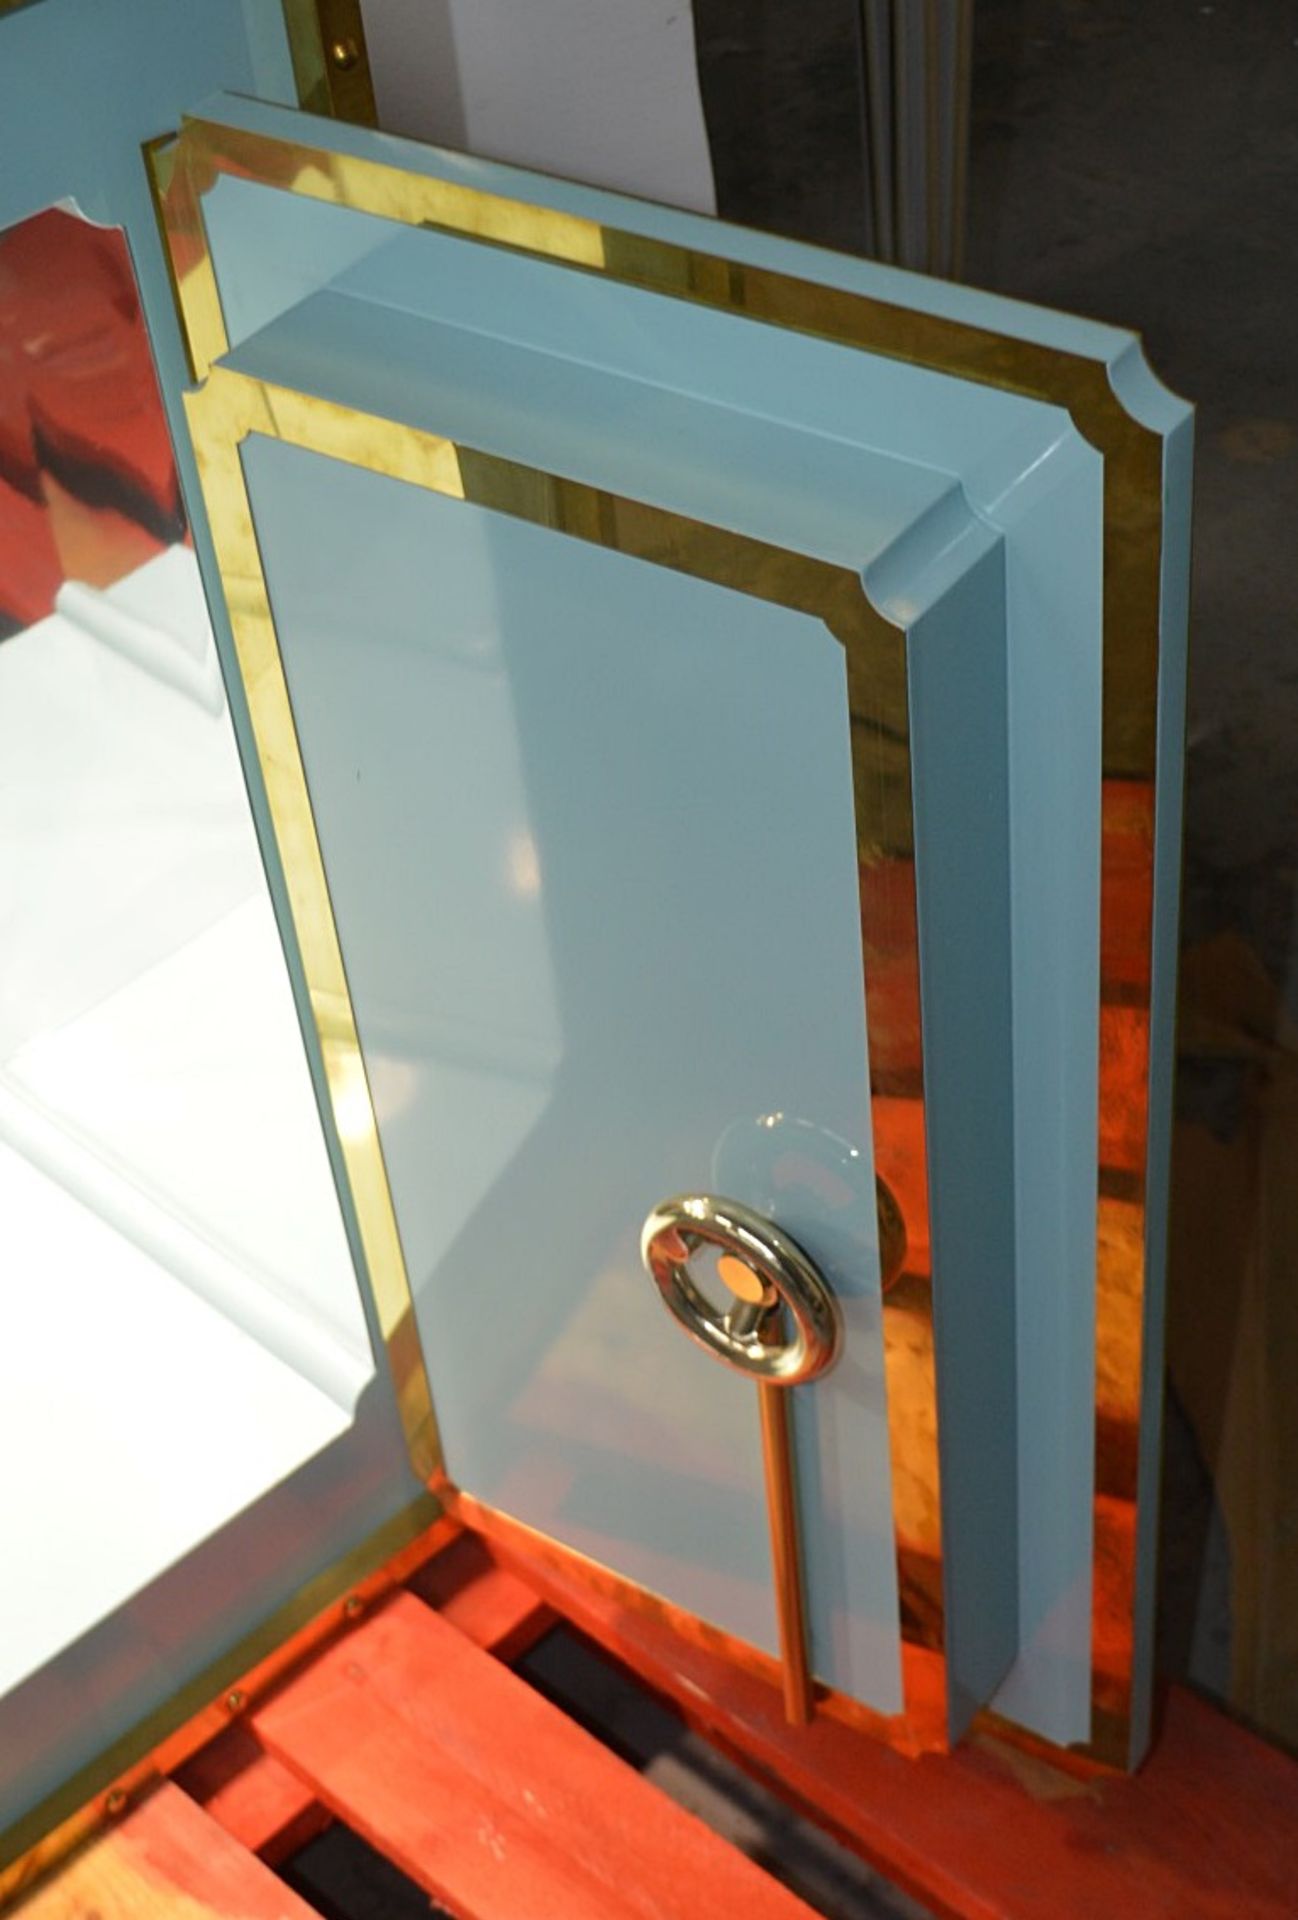 1 x Illuminated Bank Vault Safe-style Mirrored Retail Shop Display Box In Tiffany Blue - Dimensions: - Image 3 of 6